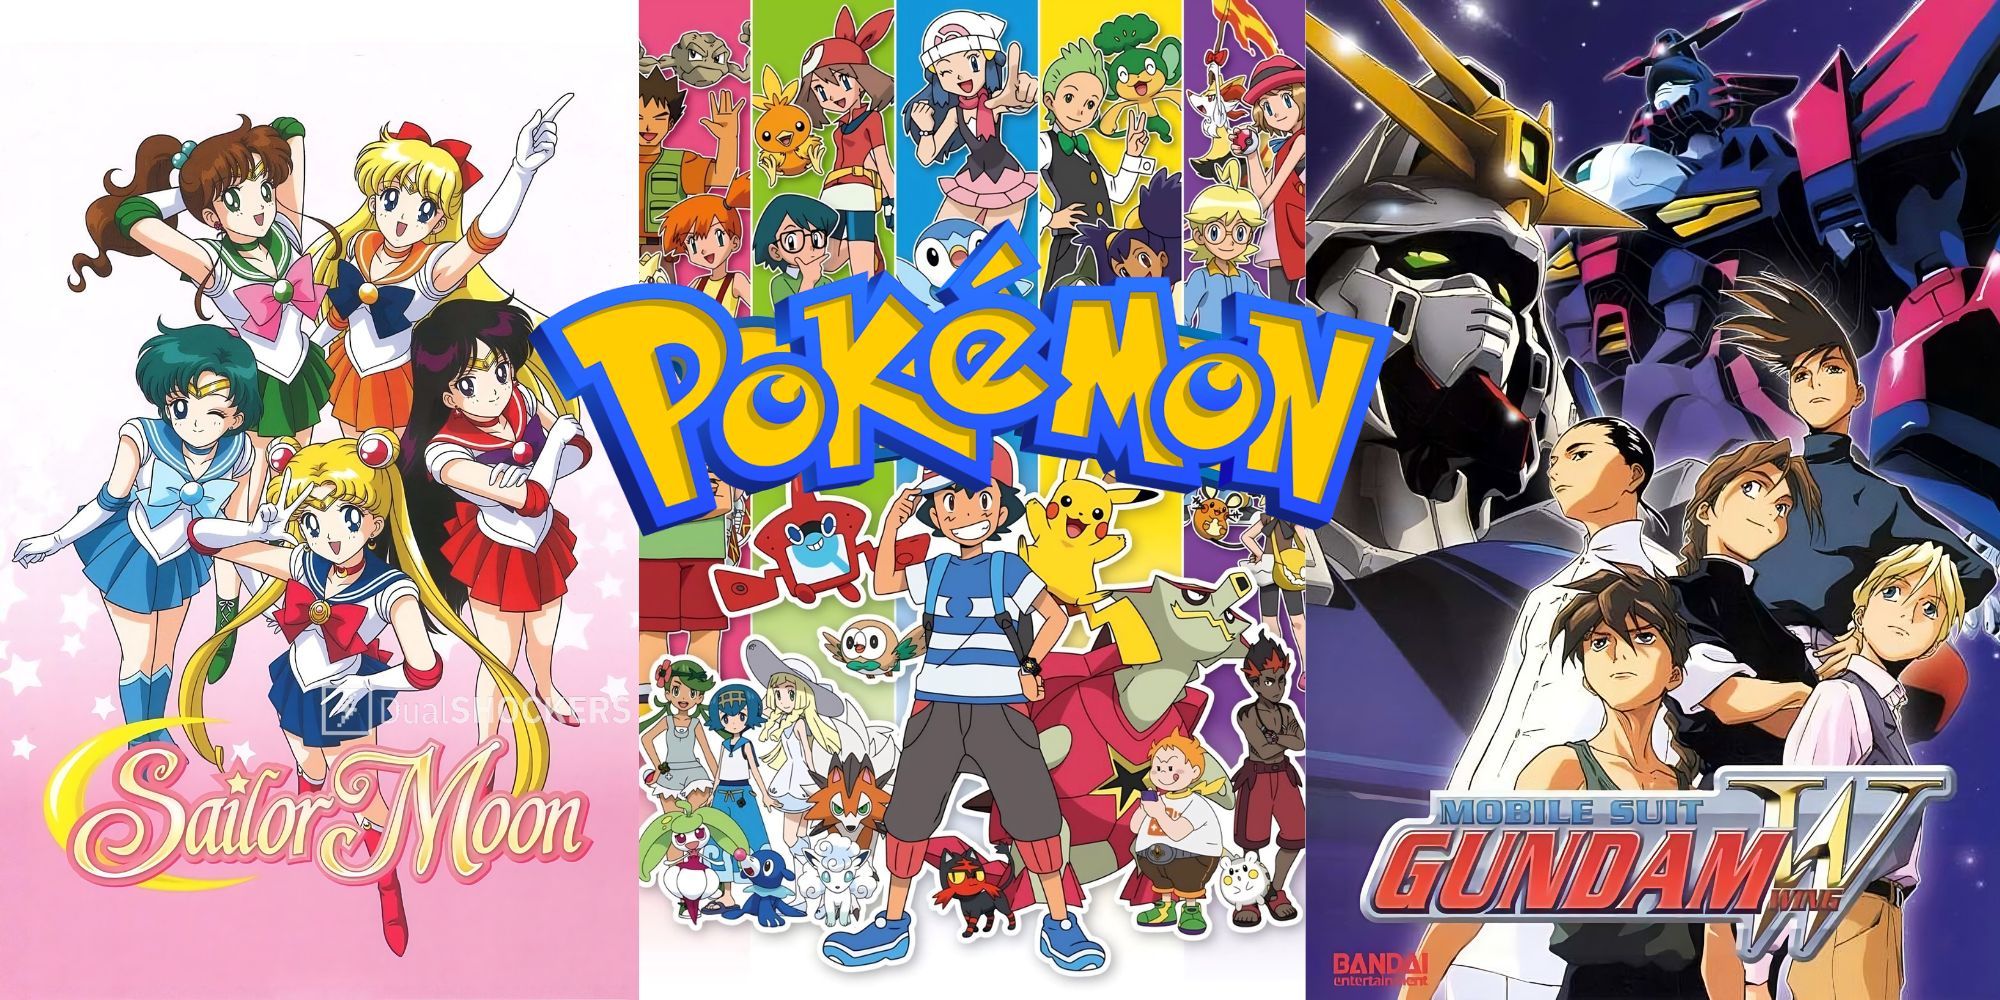 IMBD featured images of Sailor Moon, Pokemon, and Gundam franchise